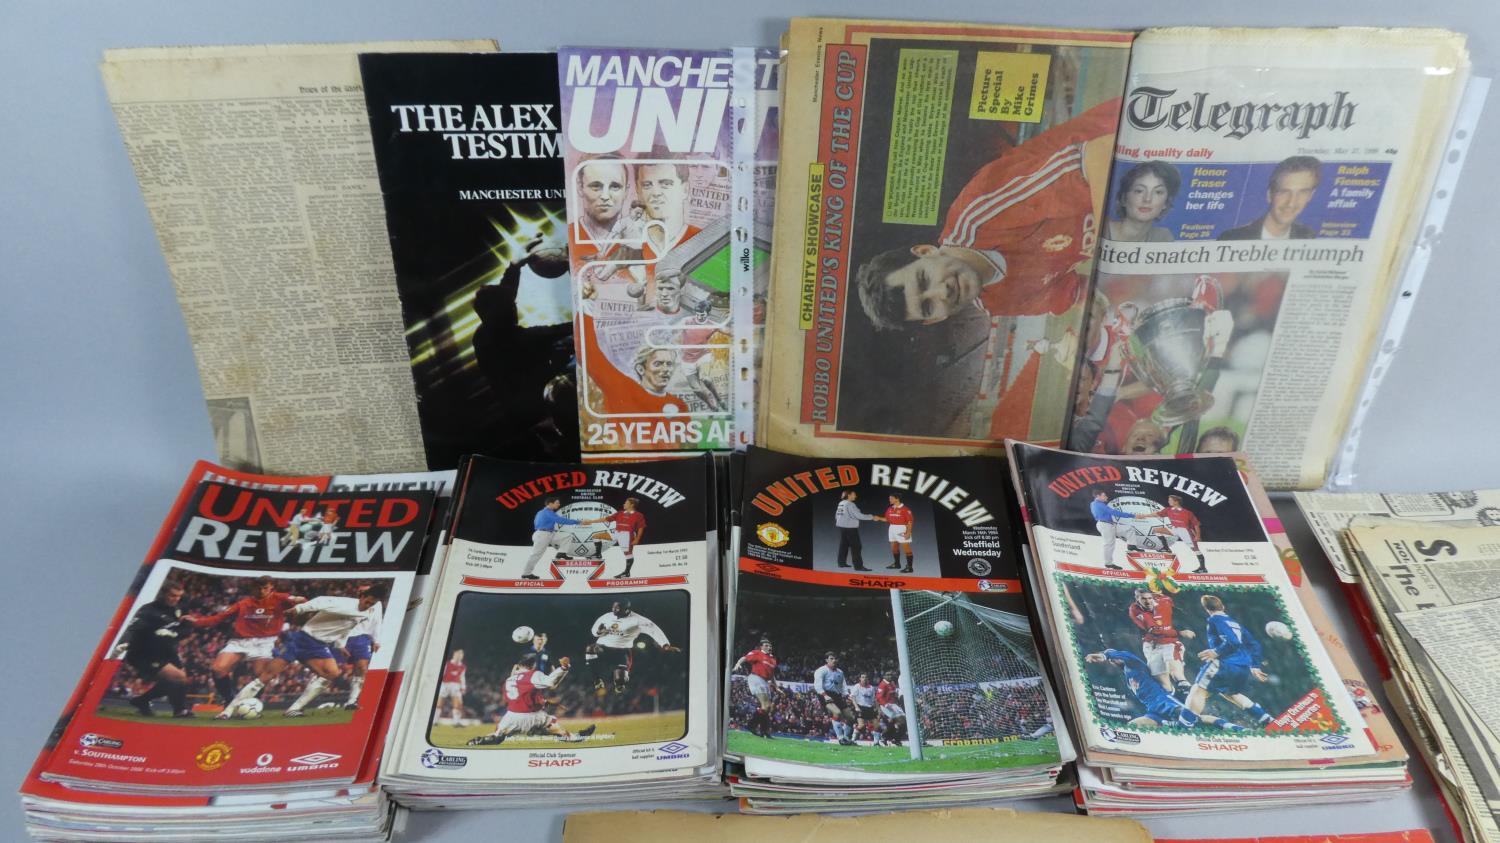 A Collection of 1990's Manchester United Football Programmes, Souvenirs, 1970 Inside Football - Image 2 of 4